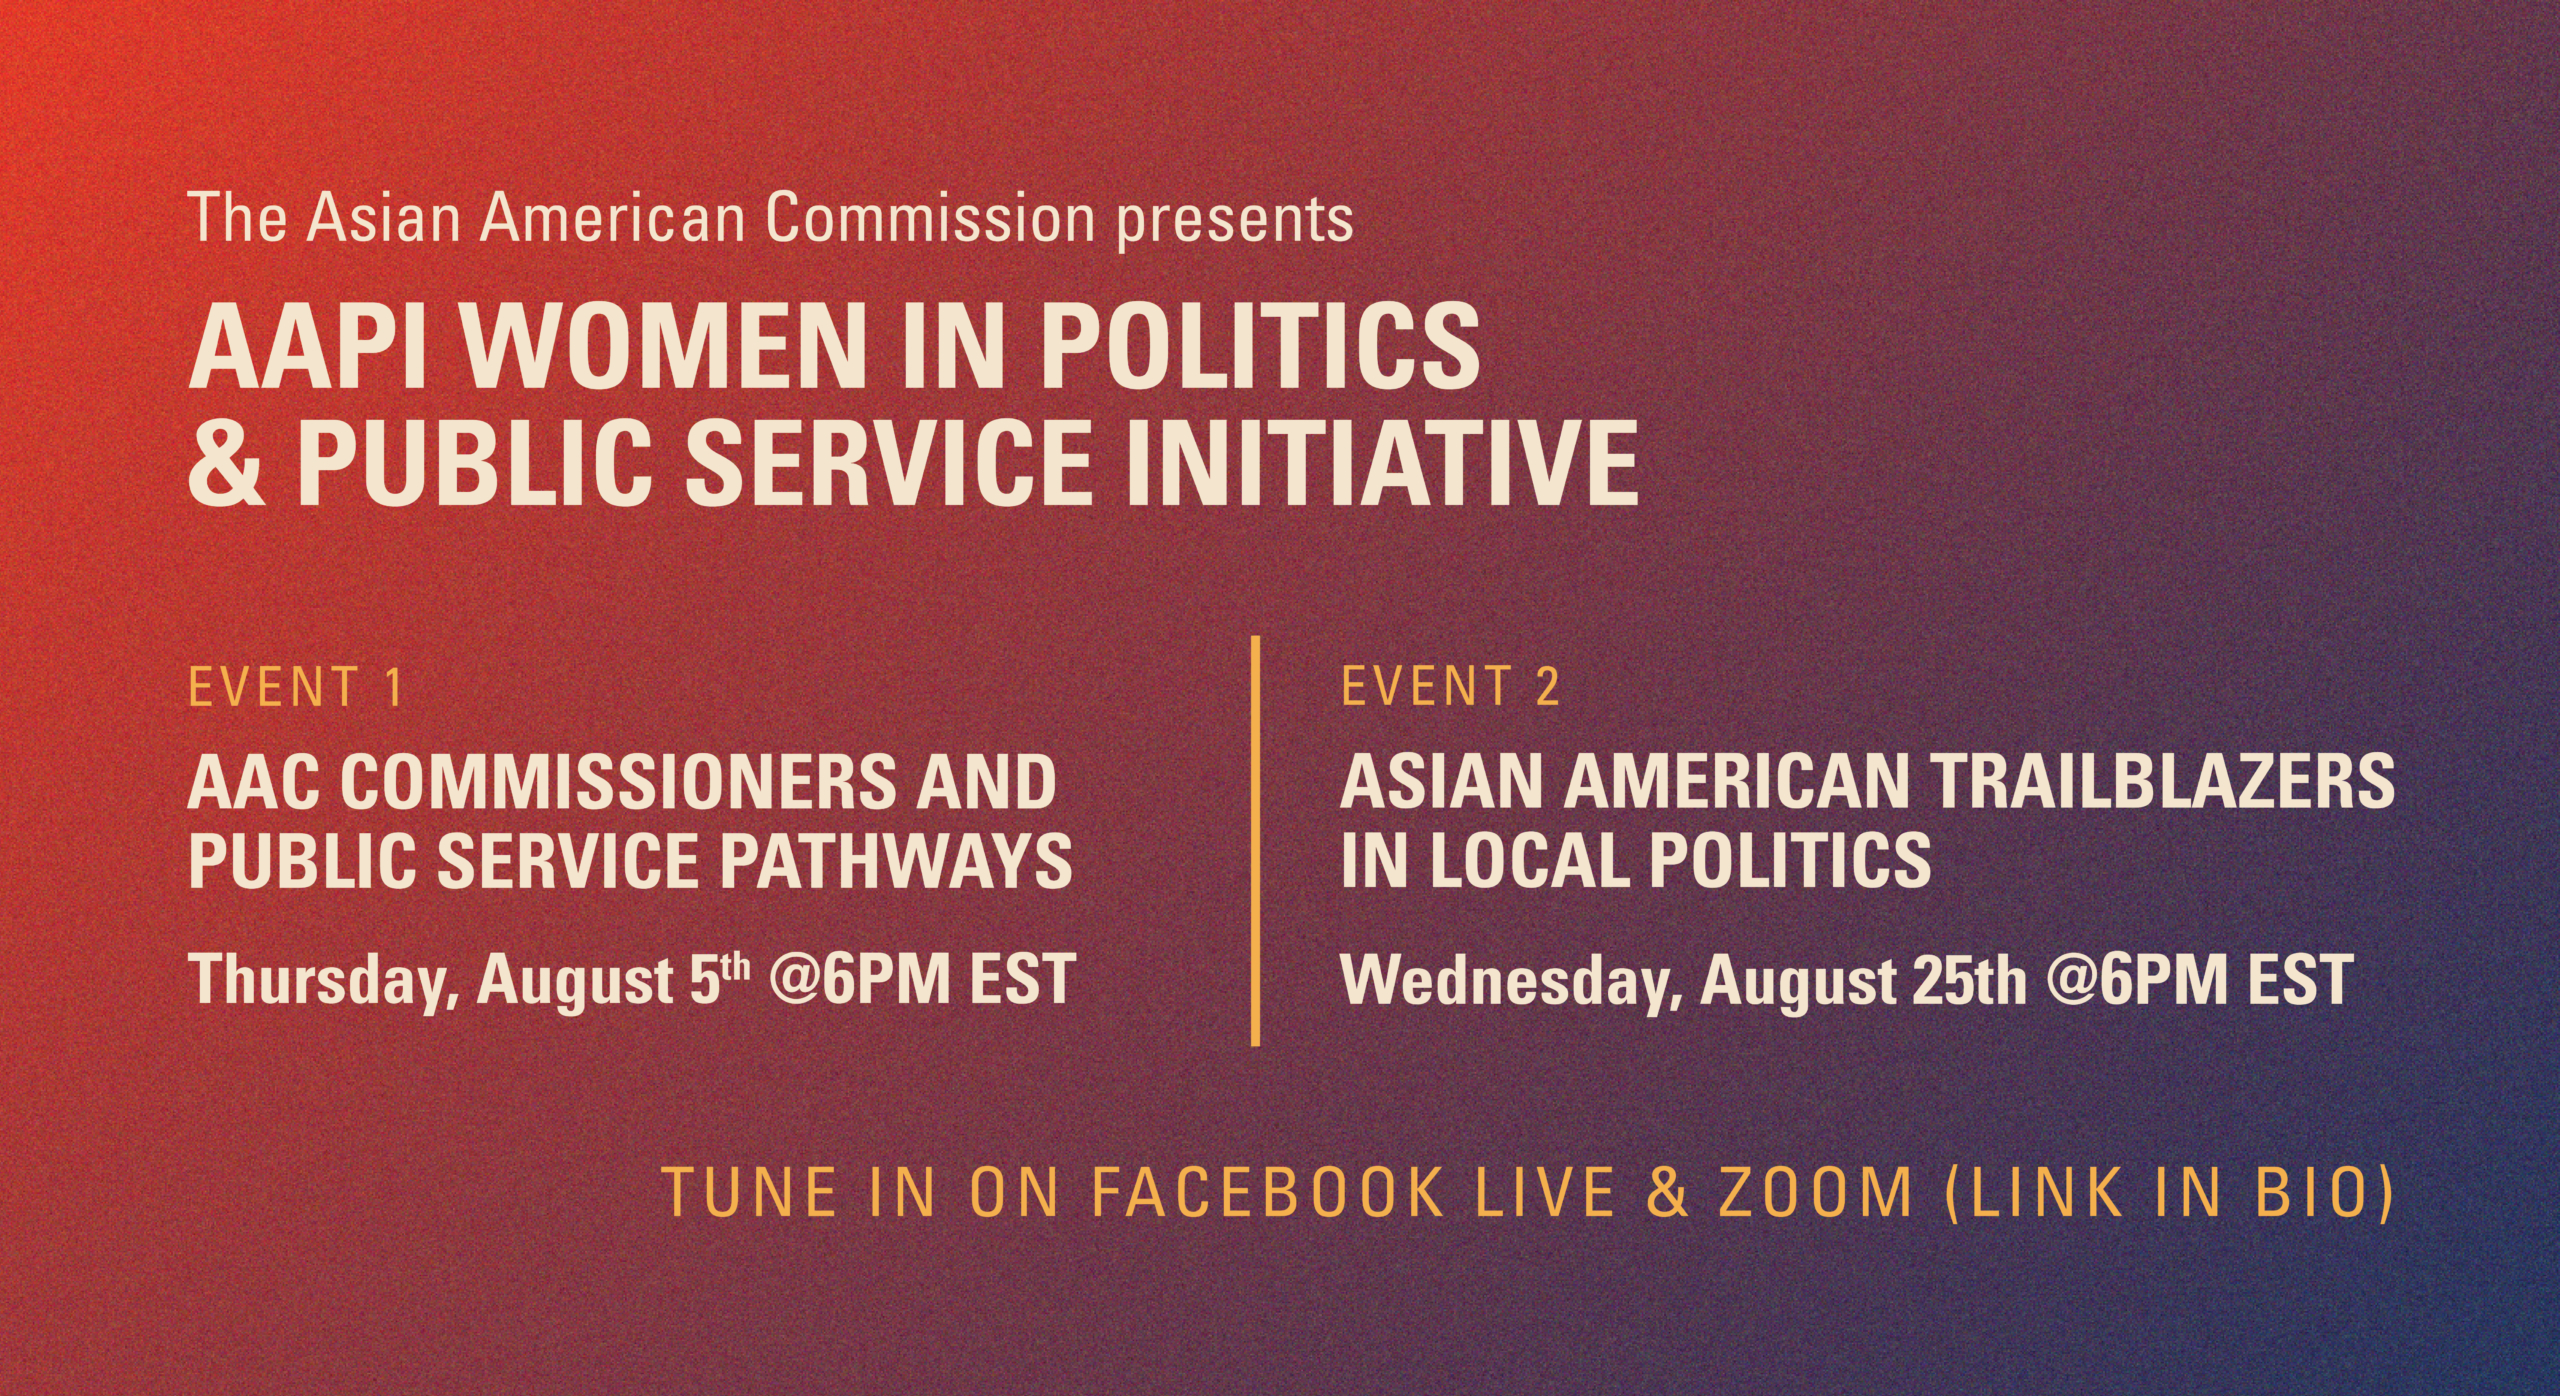 AAPI Women in Politics and Public Service Event Series | August 5th & August 25th @6PM EST